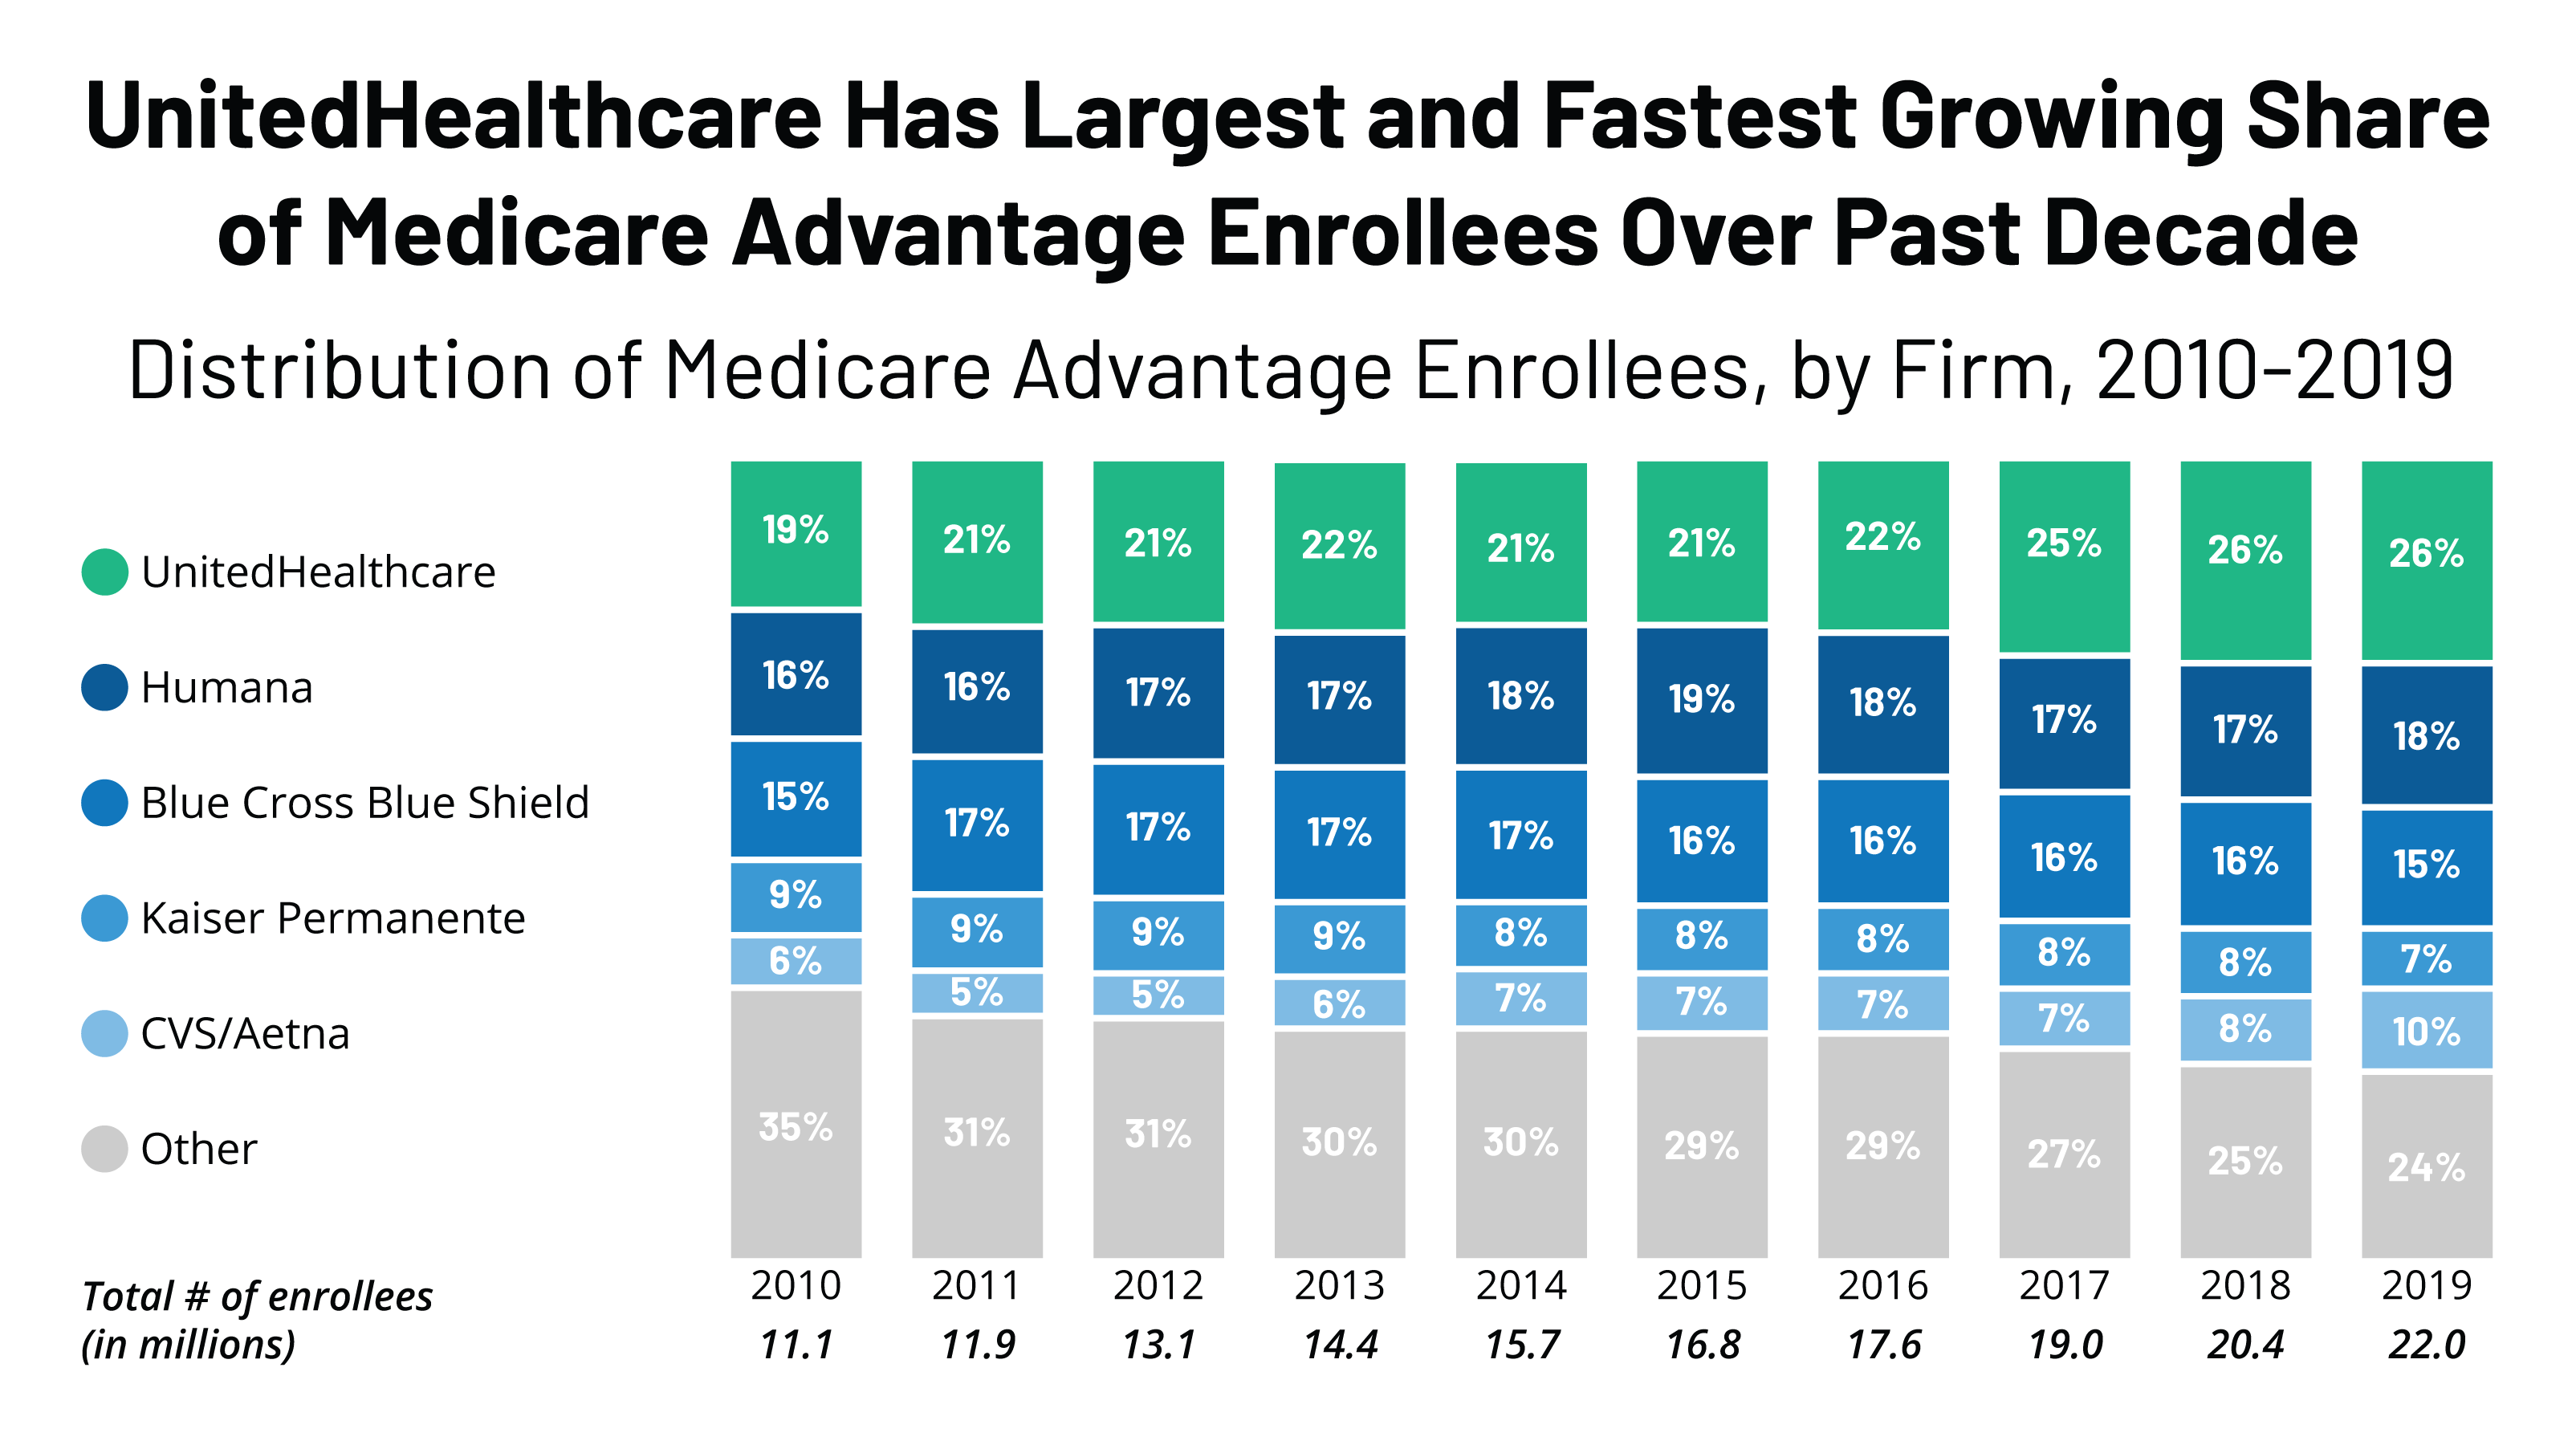 UnitedHealthcare Has Largest and Fastest Growing Share of Medicare